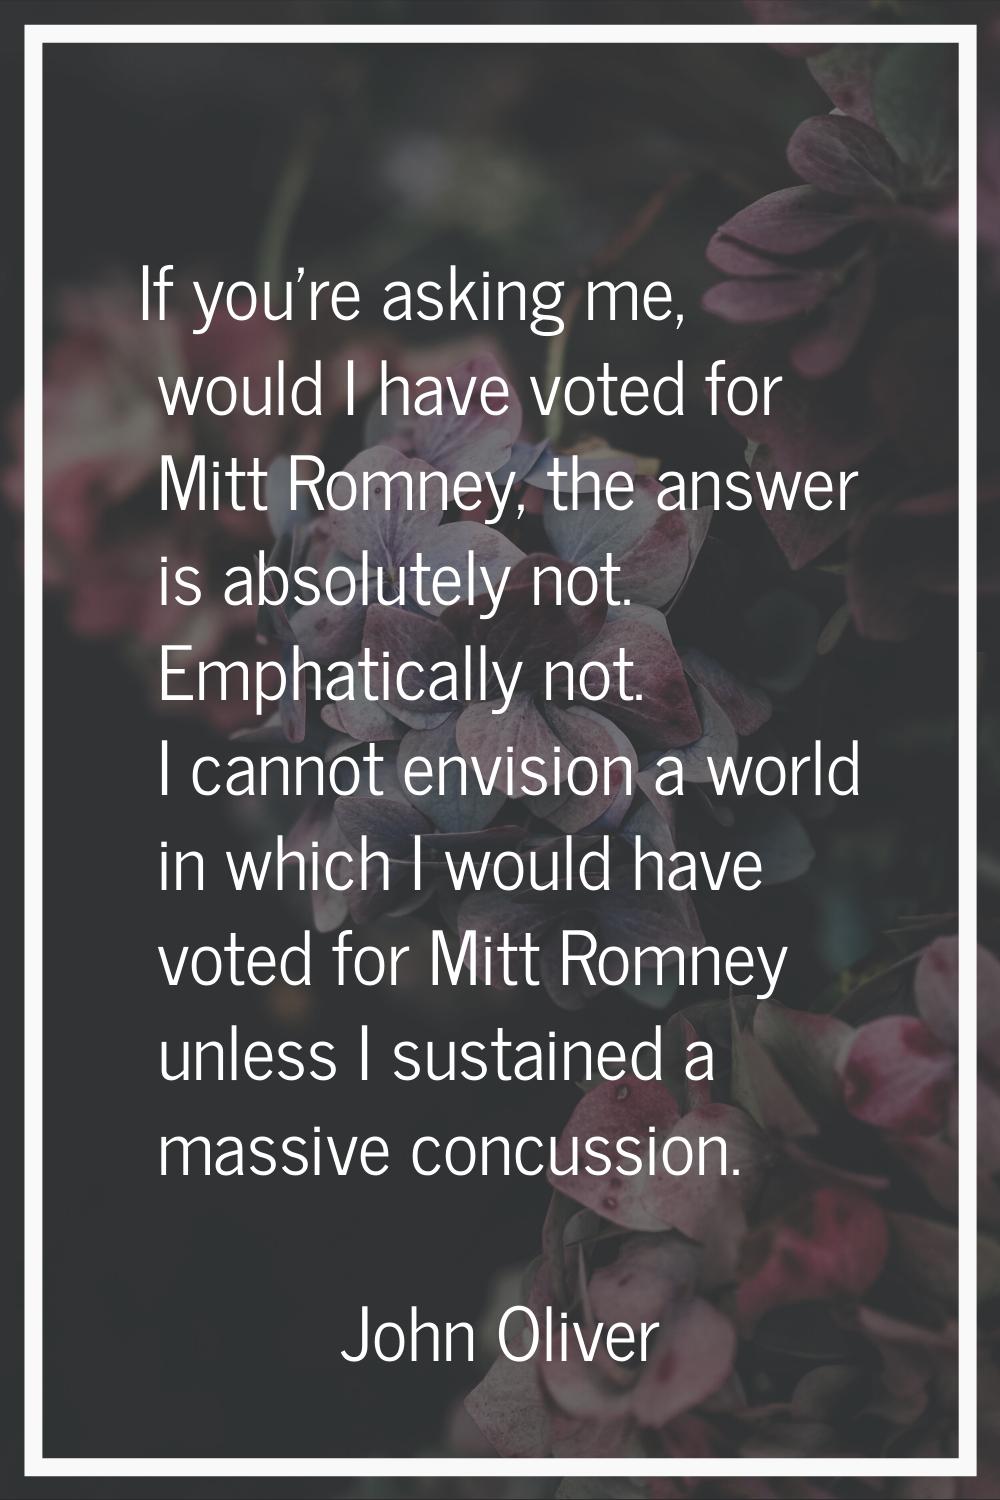 If you're asking me, would I have voted for Mitt Romney, the answer is absolutely not. Emphatically